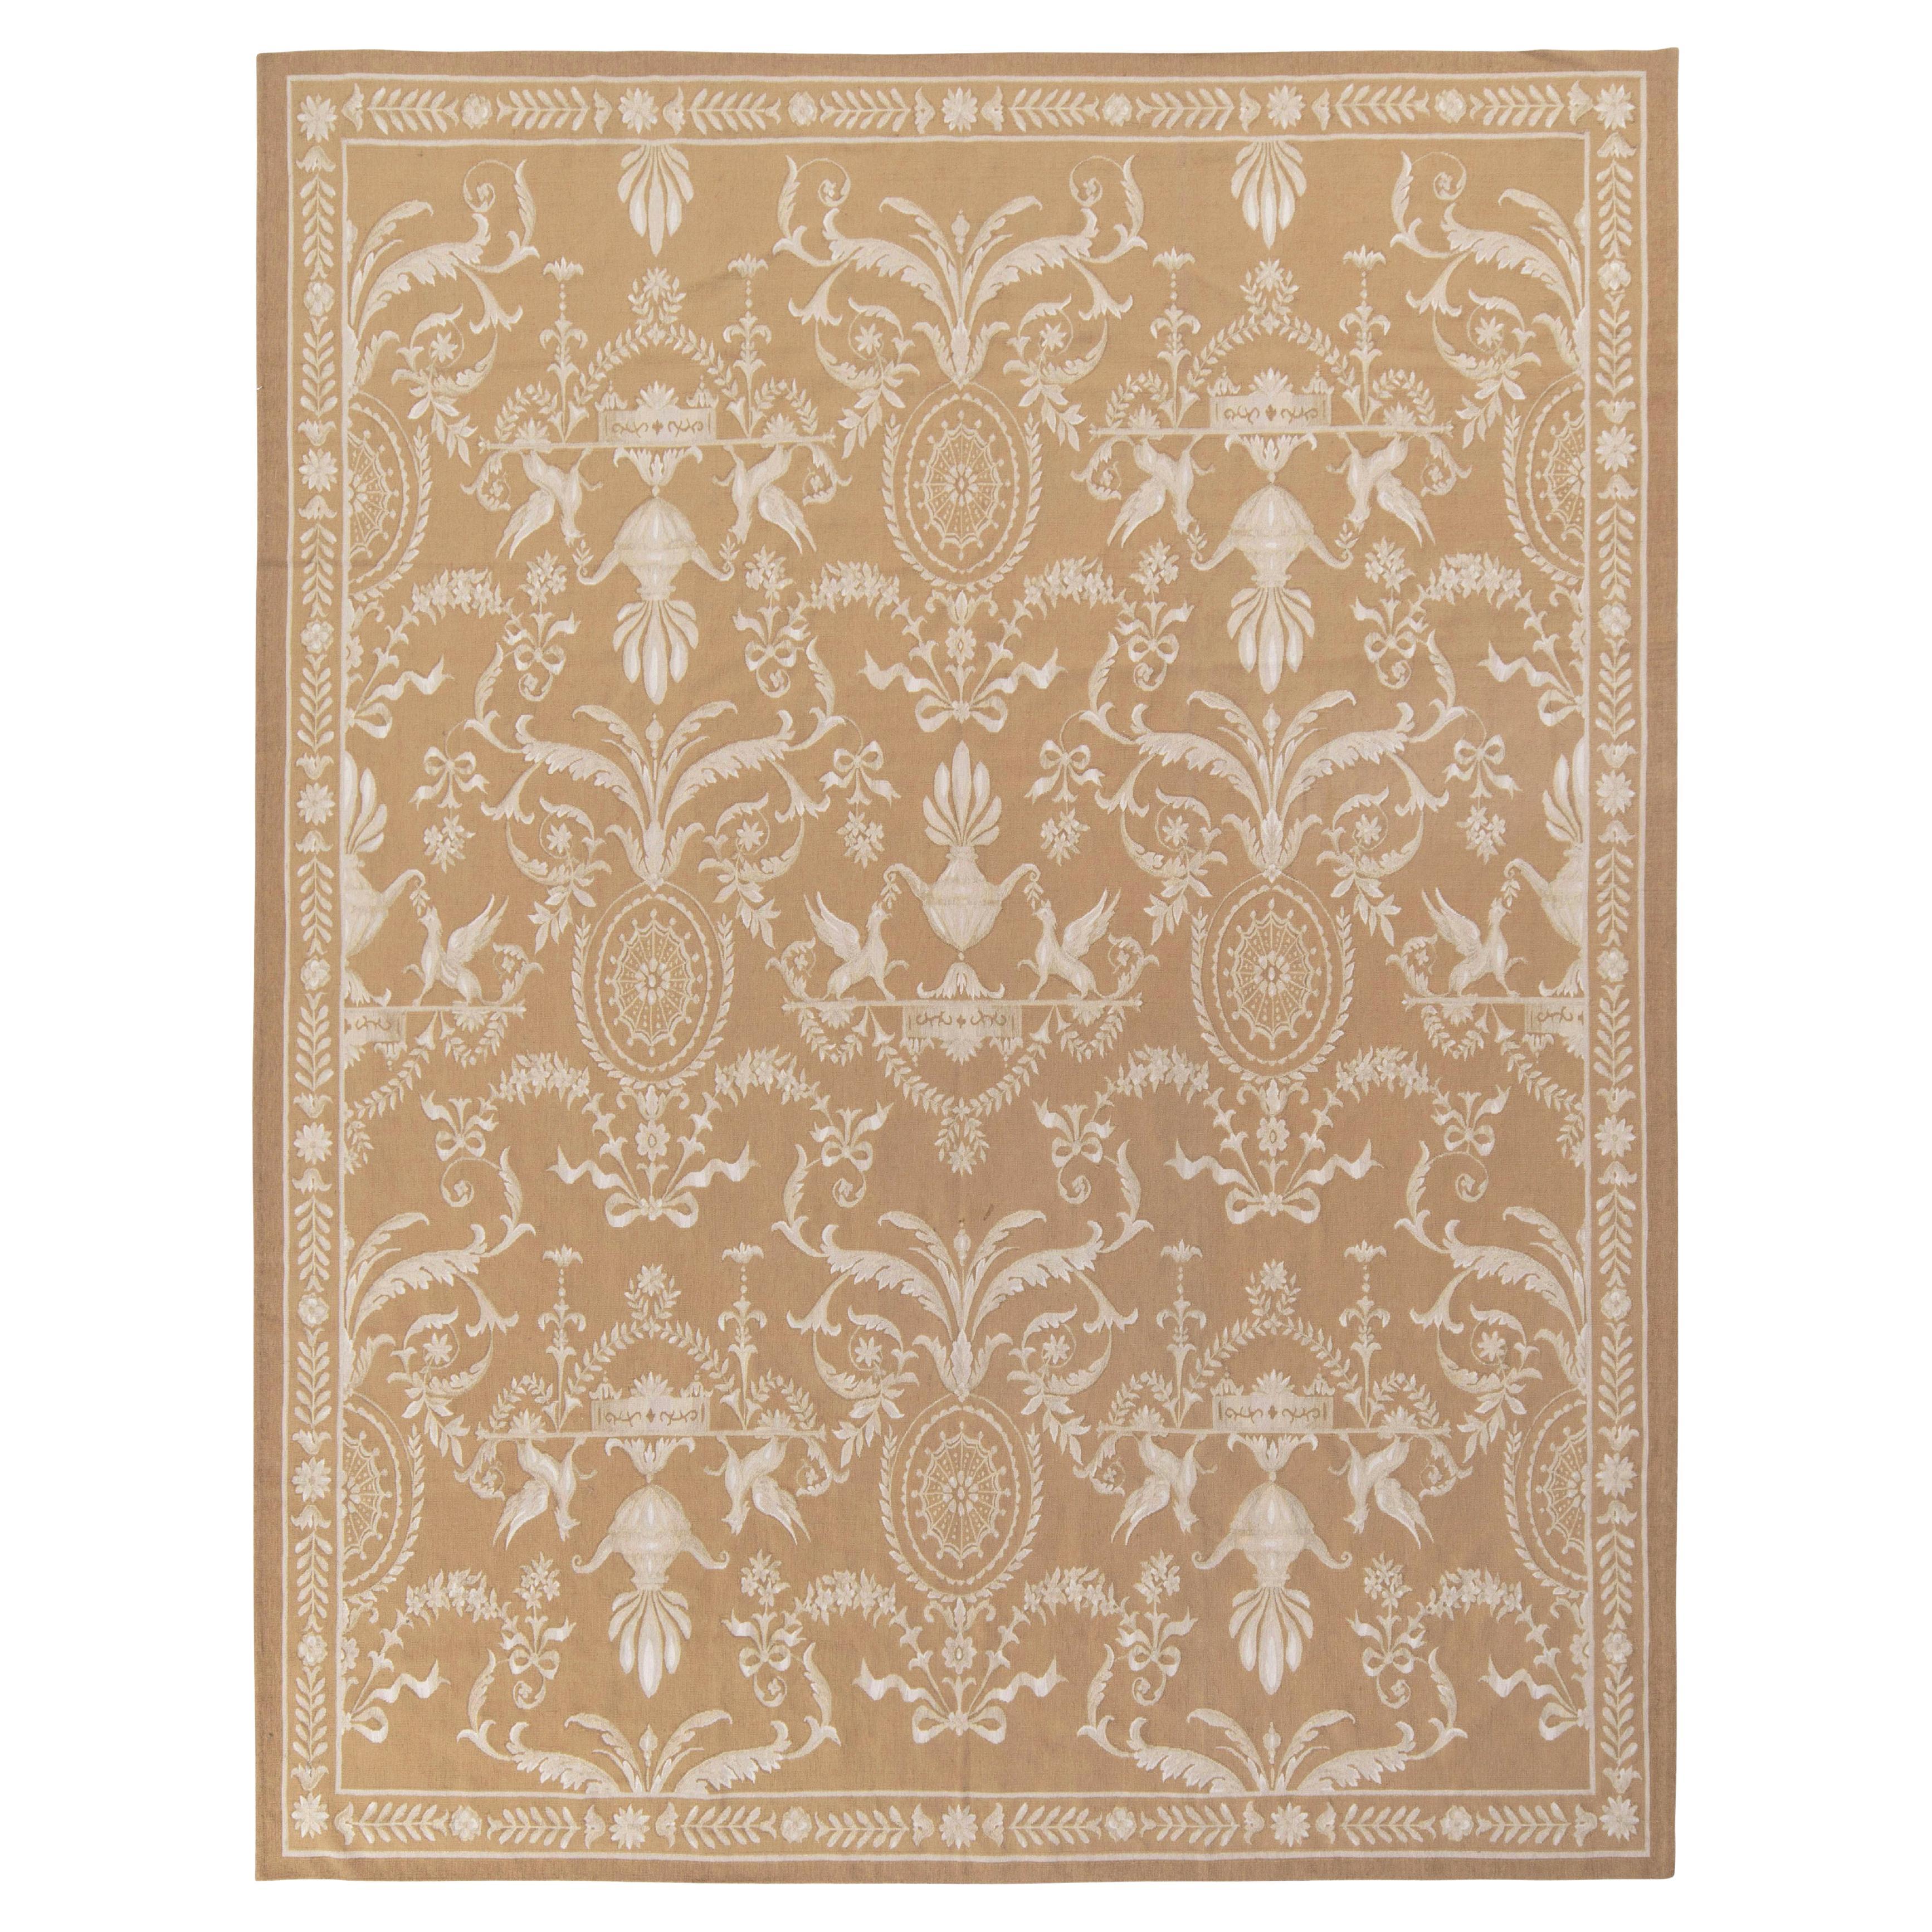 Rug & Kilim’s Aubusson Style Flat Weave in Beige-Brown, White Floral Pattern